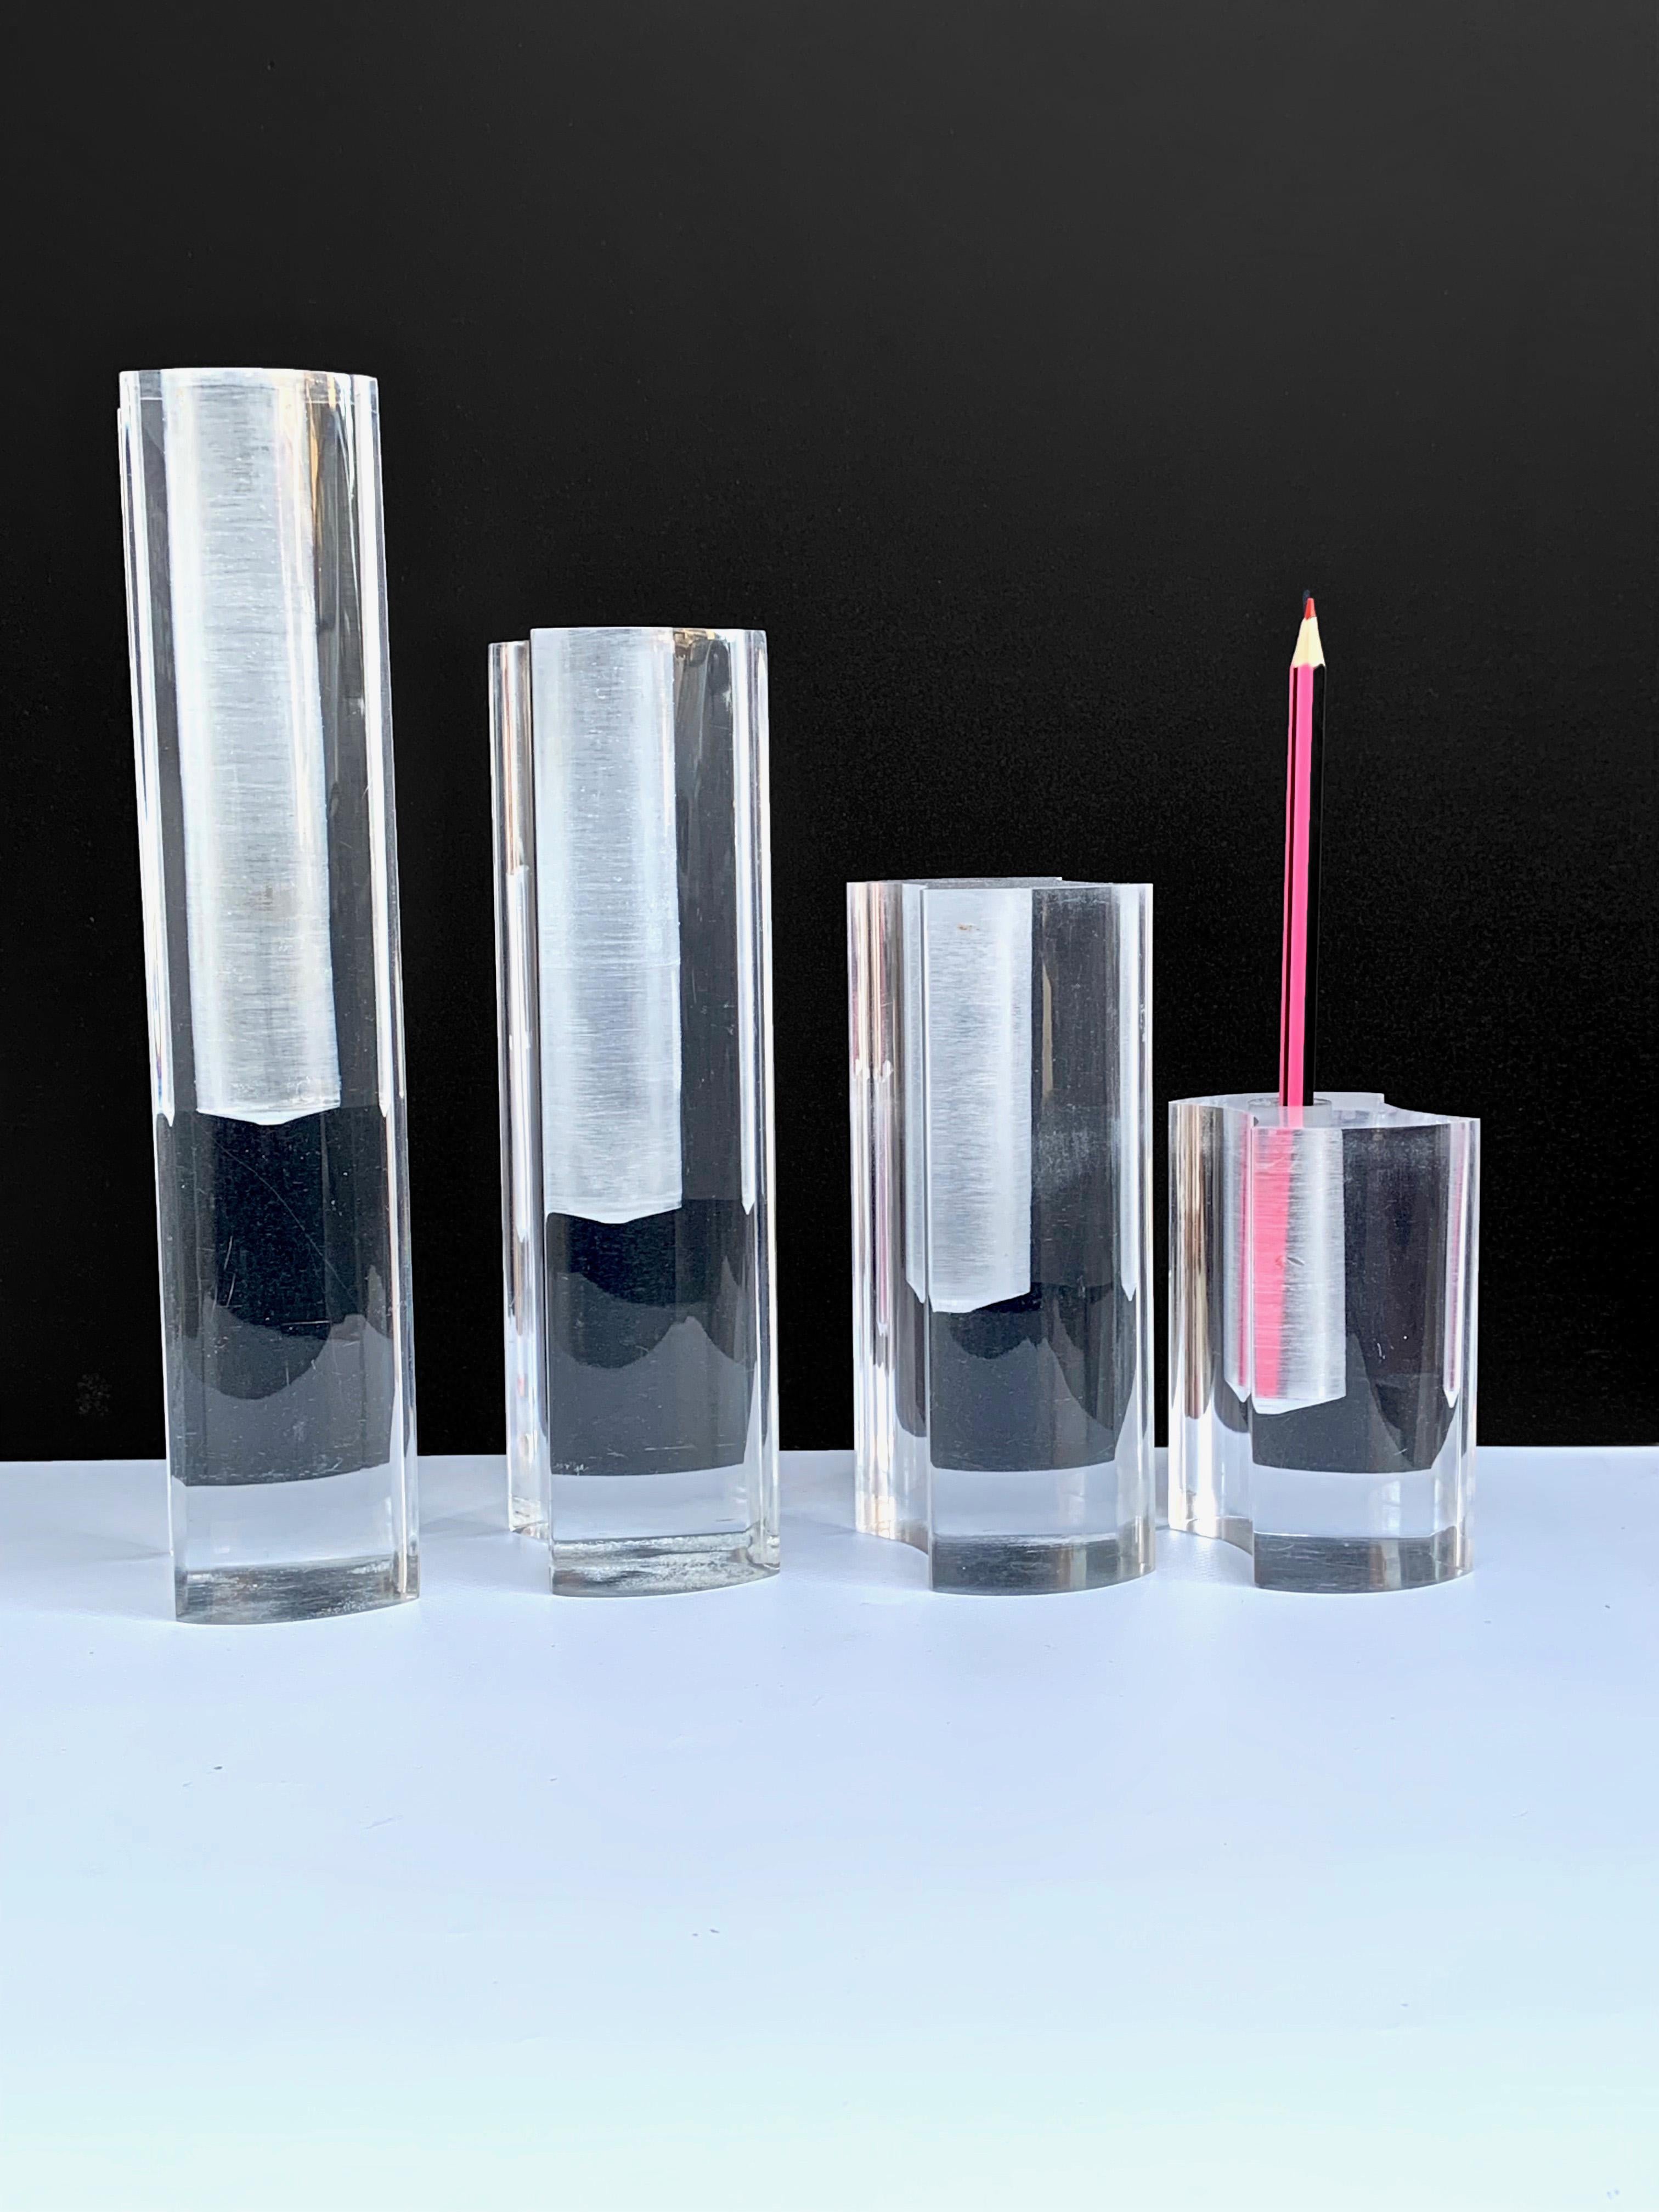 Set of four wonderful plexiglass midcentury crystal plexiglass Italian vases. These pieces were produced by Guzzini in Italy during 1970s.

The set, with the four vases one close to the other, creates a mesmerizing effect due to proportions and